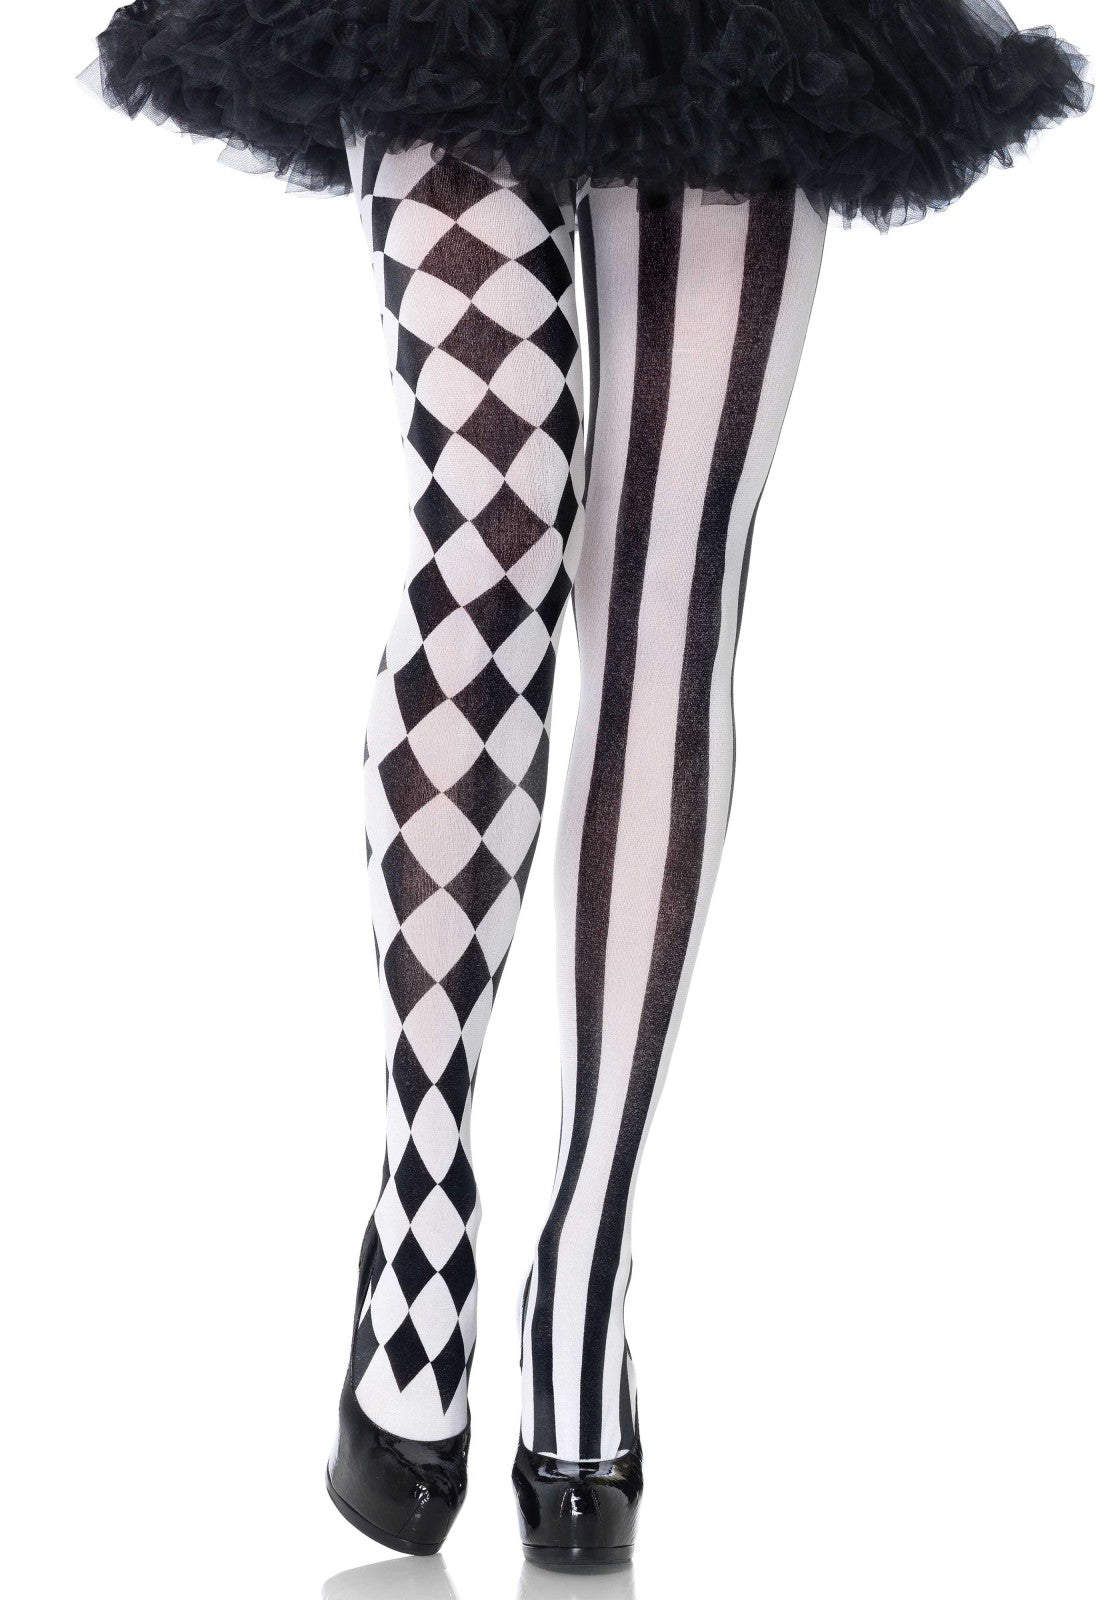 Leg Avenue 7720 Harlequin Tights - White opaque tights with a black print, one leg has vertical stripes and the other is a checkered pattern. Perfect for Halloween. Worn with black tutu and black patent heel shoes.